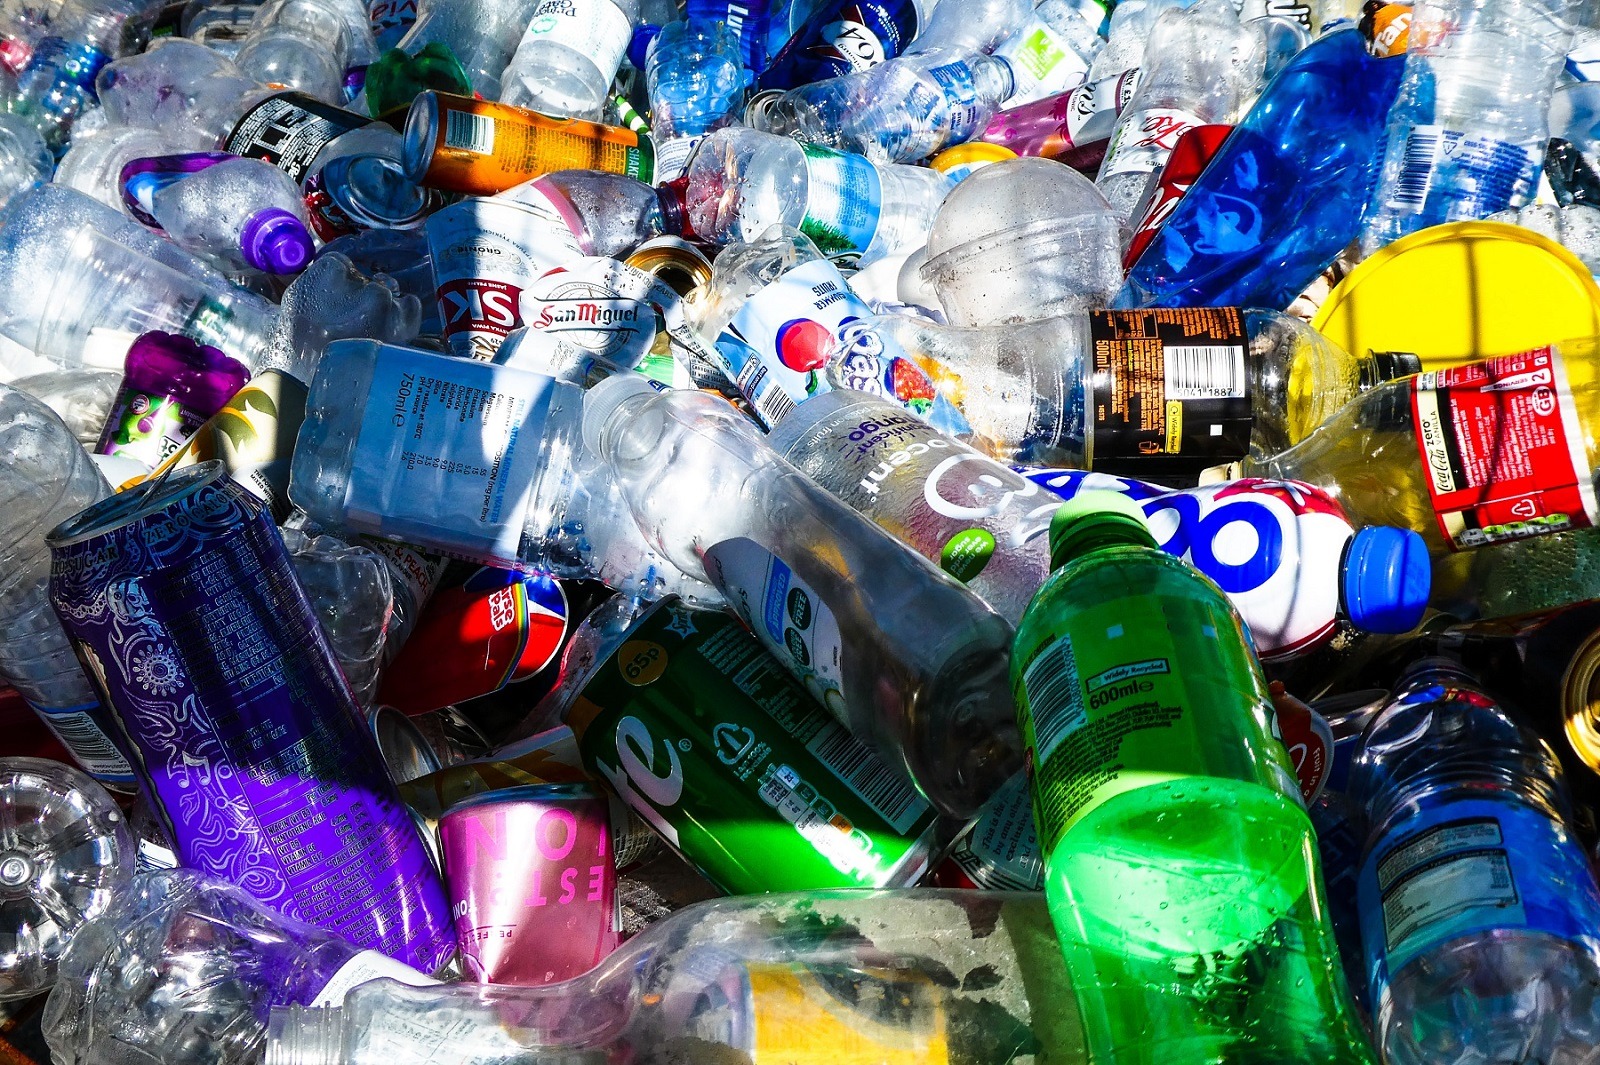 Deposit return schemes – will they revolutionise how we recycle?